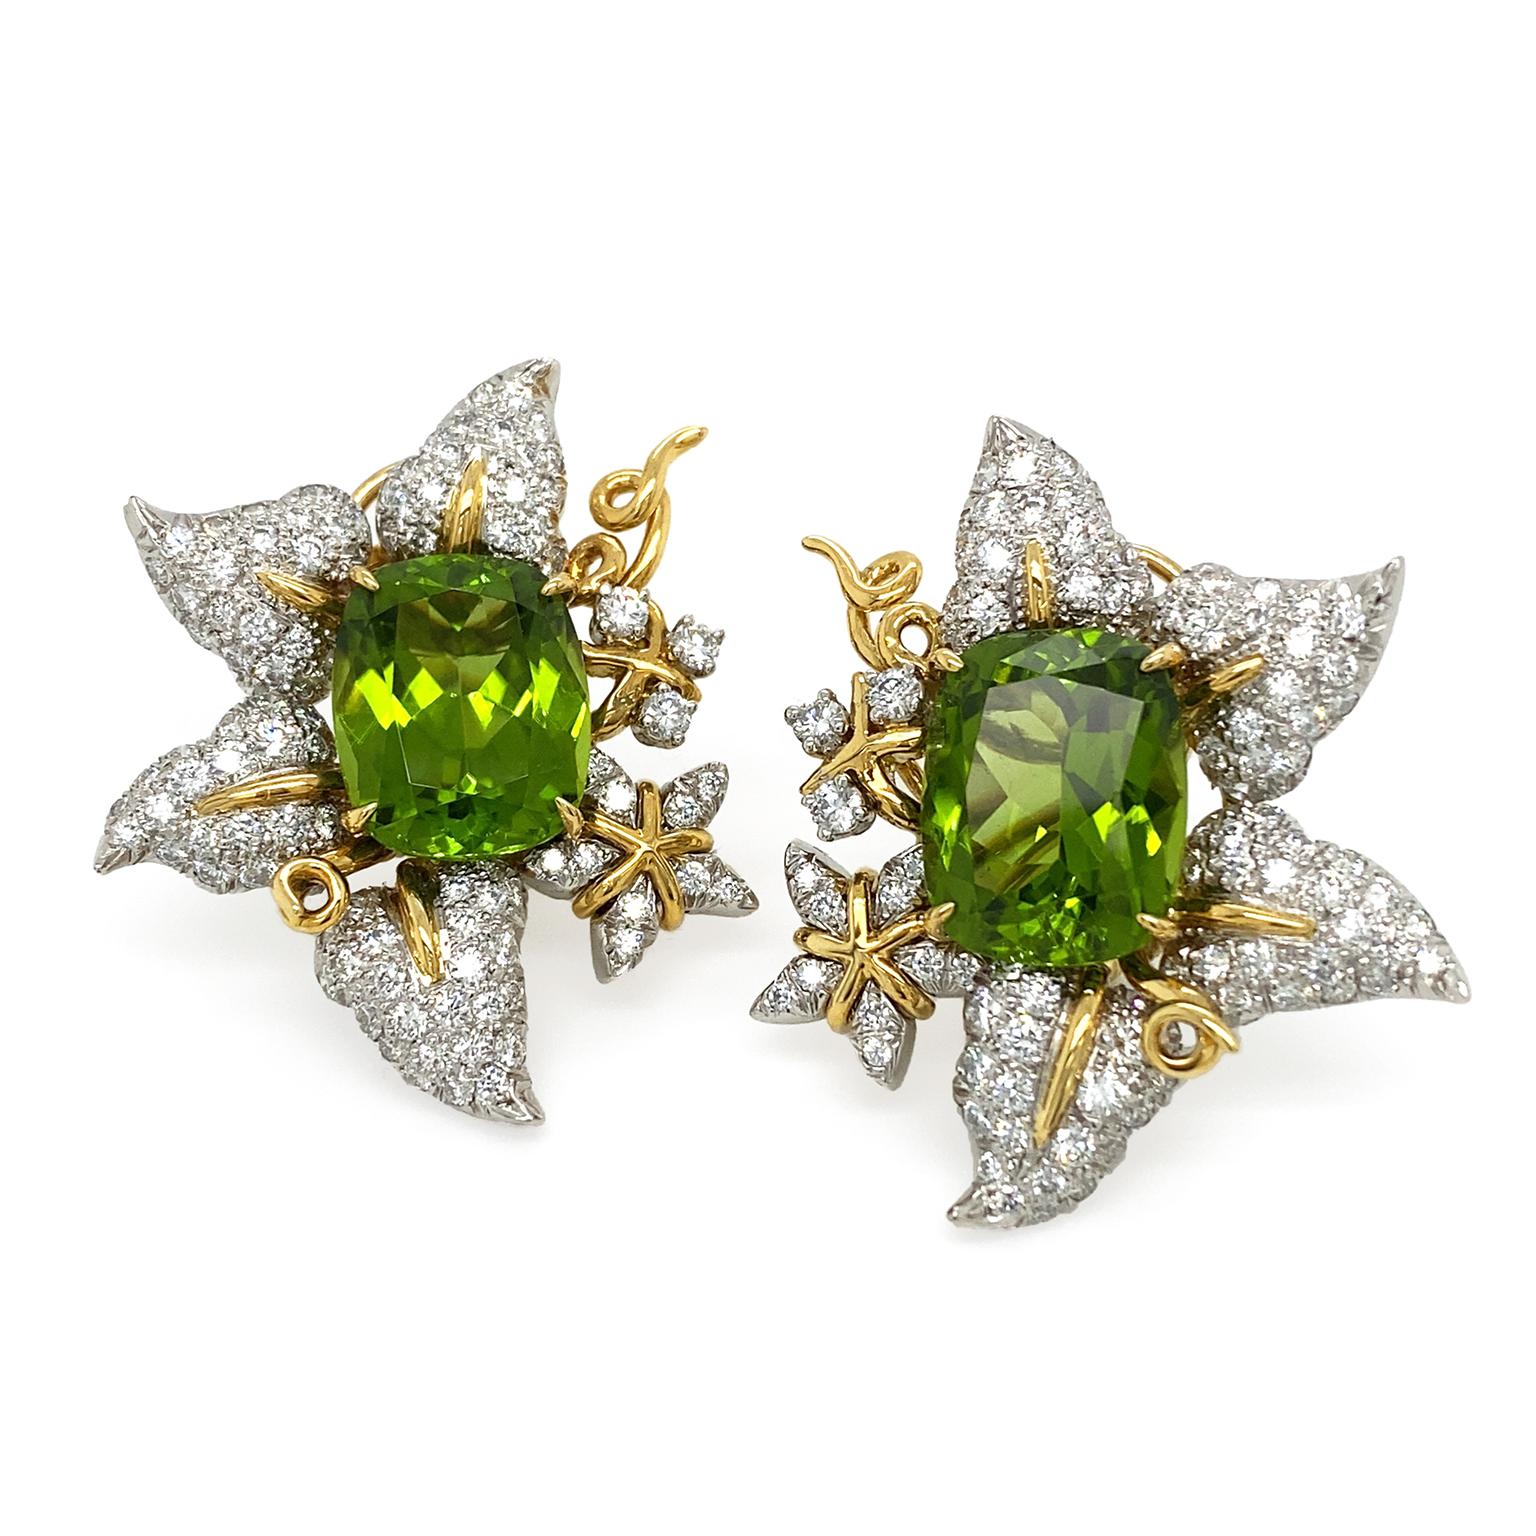 Peridots glimmer an array of light and forest green hues as the center of these earrings. Surrounding the jewel are platinum leaves, which are embellished with brilliant cut diamonds. 18k yellow gold serves as the midrib of the leaves as well as